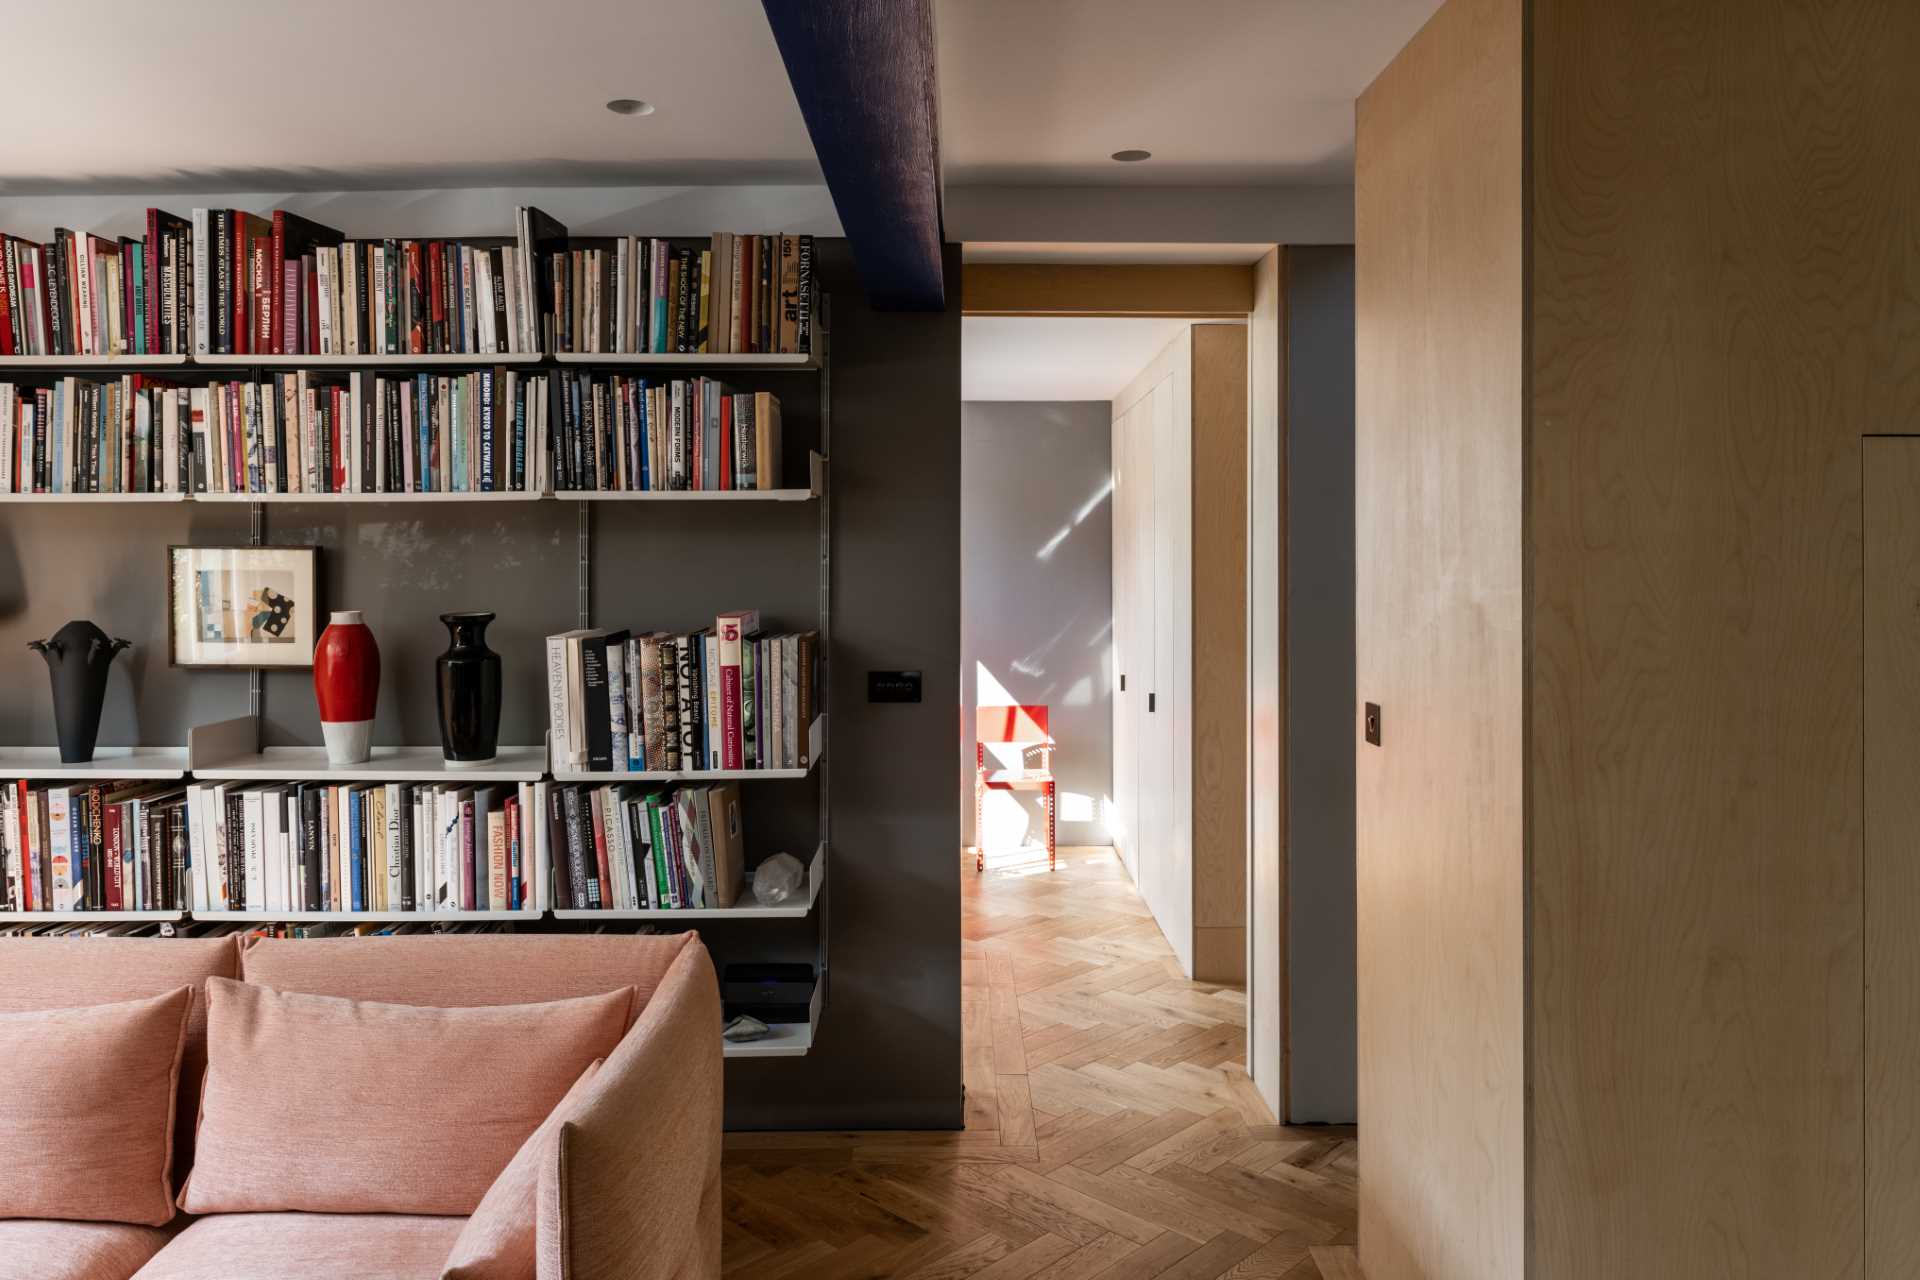 This living room, with views of the street, has wall-mounted bookshelves and dark walls.